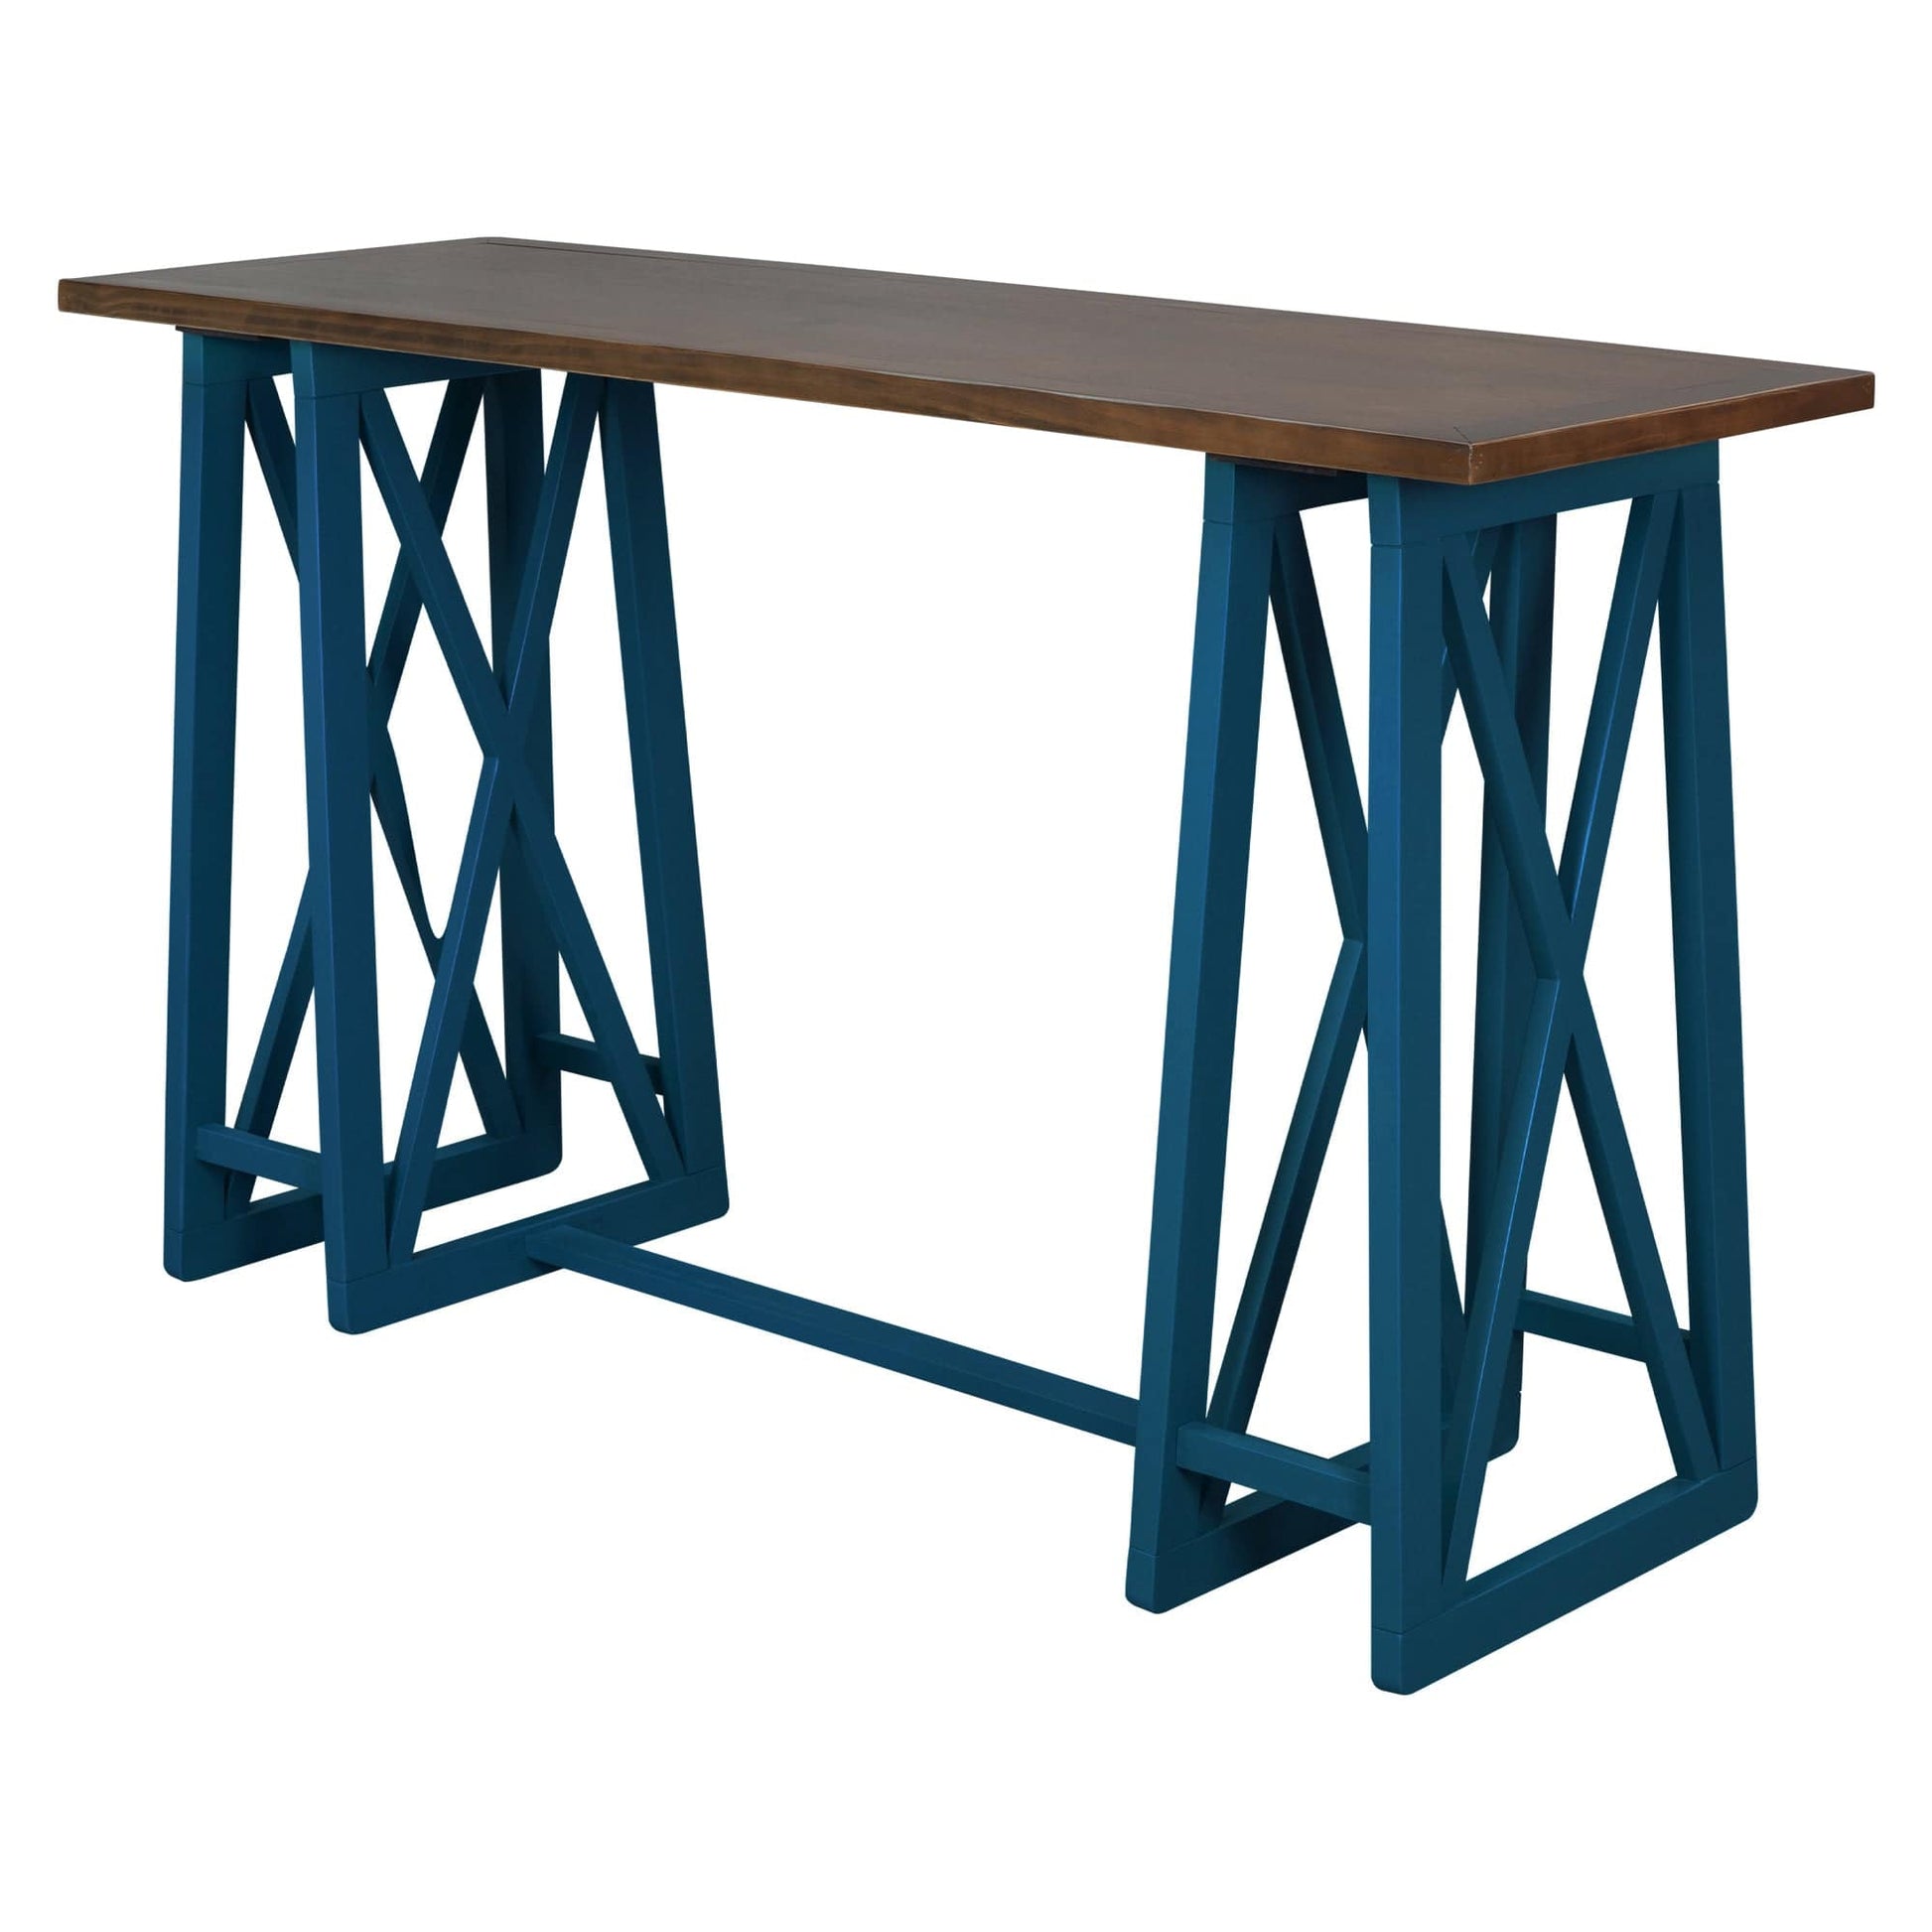 1st Choice Furniture Direct Counter Height Set 1st Choice 5-Piece Walnut+Blue Counter Height Dining Set with 4 stools